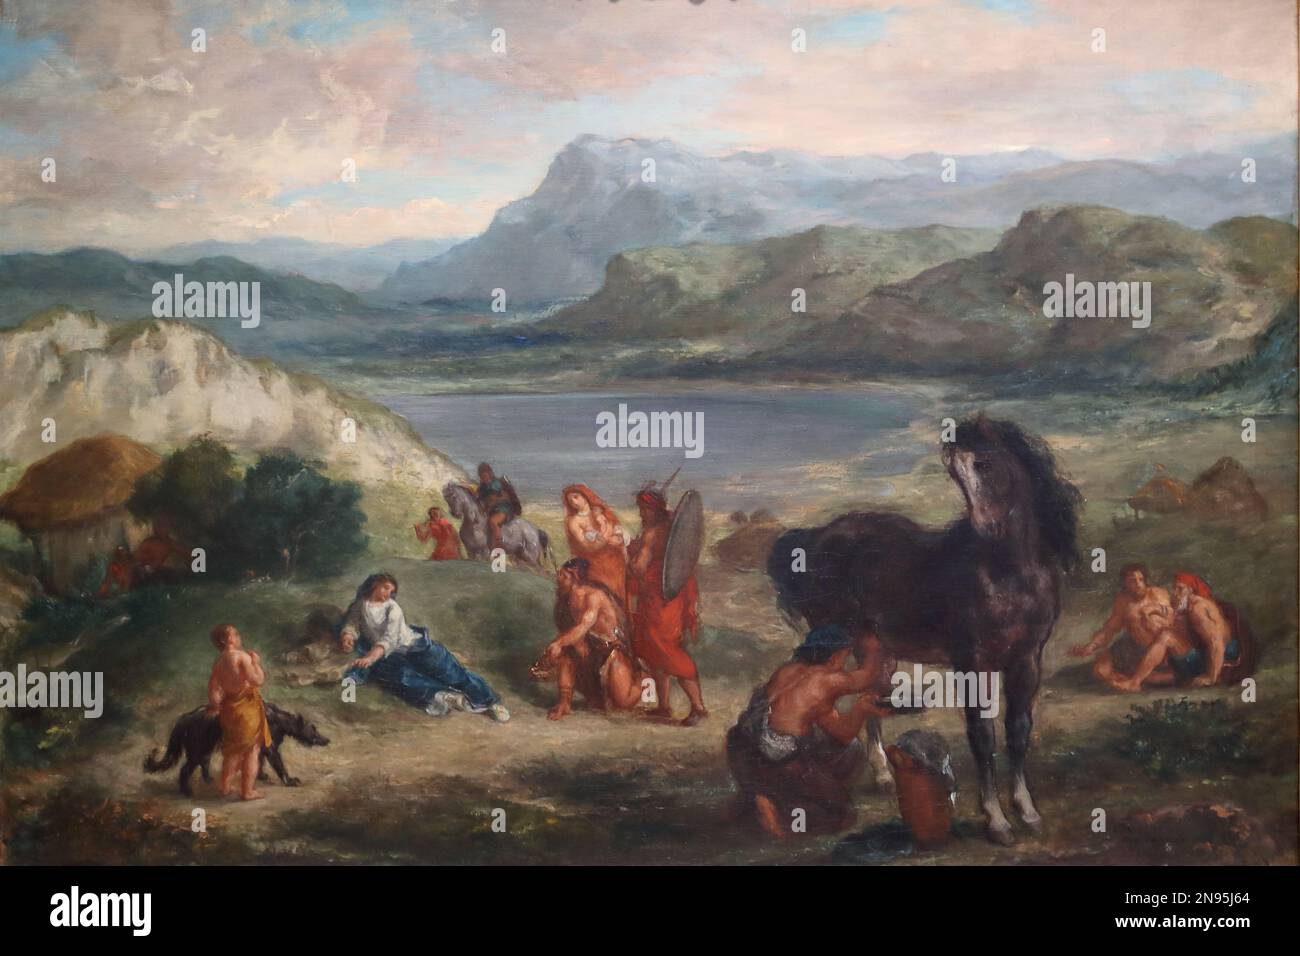 Ovid among the Scythians by French Romantic painter Eugene Delacroix at the National Gallery, London, UK Stock Photo